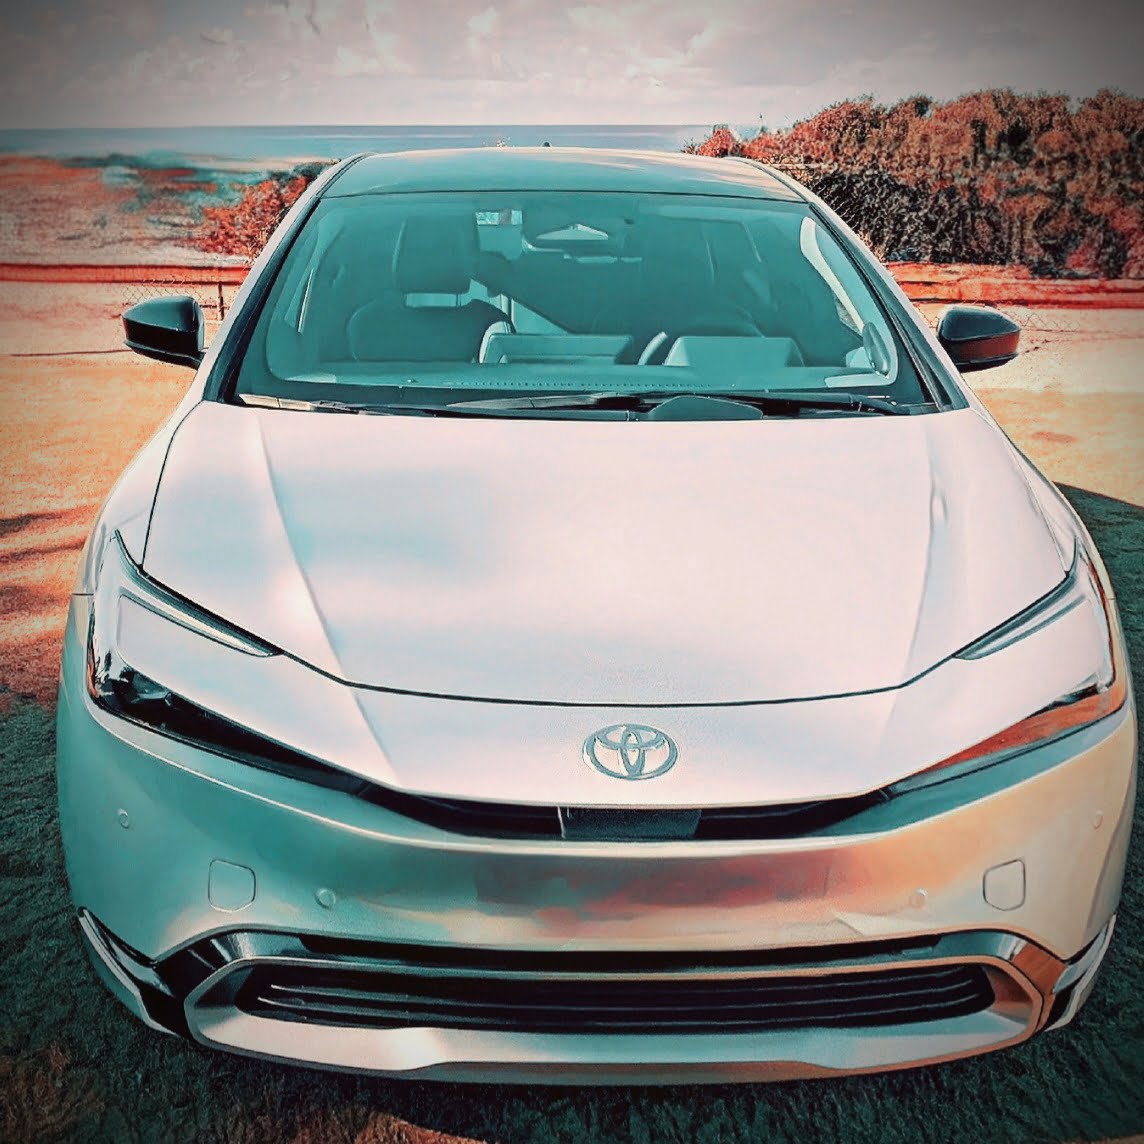 2023 Toyota Prius first drive via Kathy Dyess and 360 MAGAZINE.